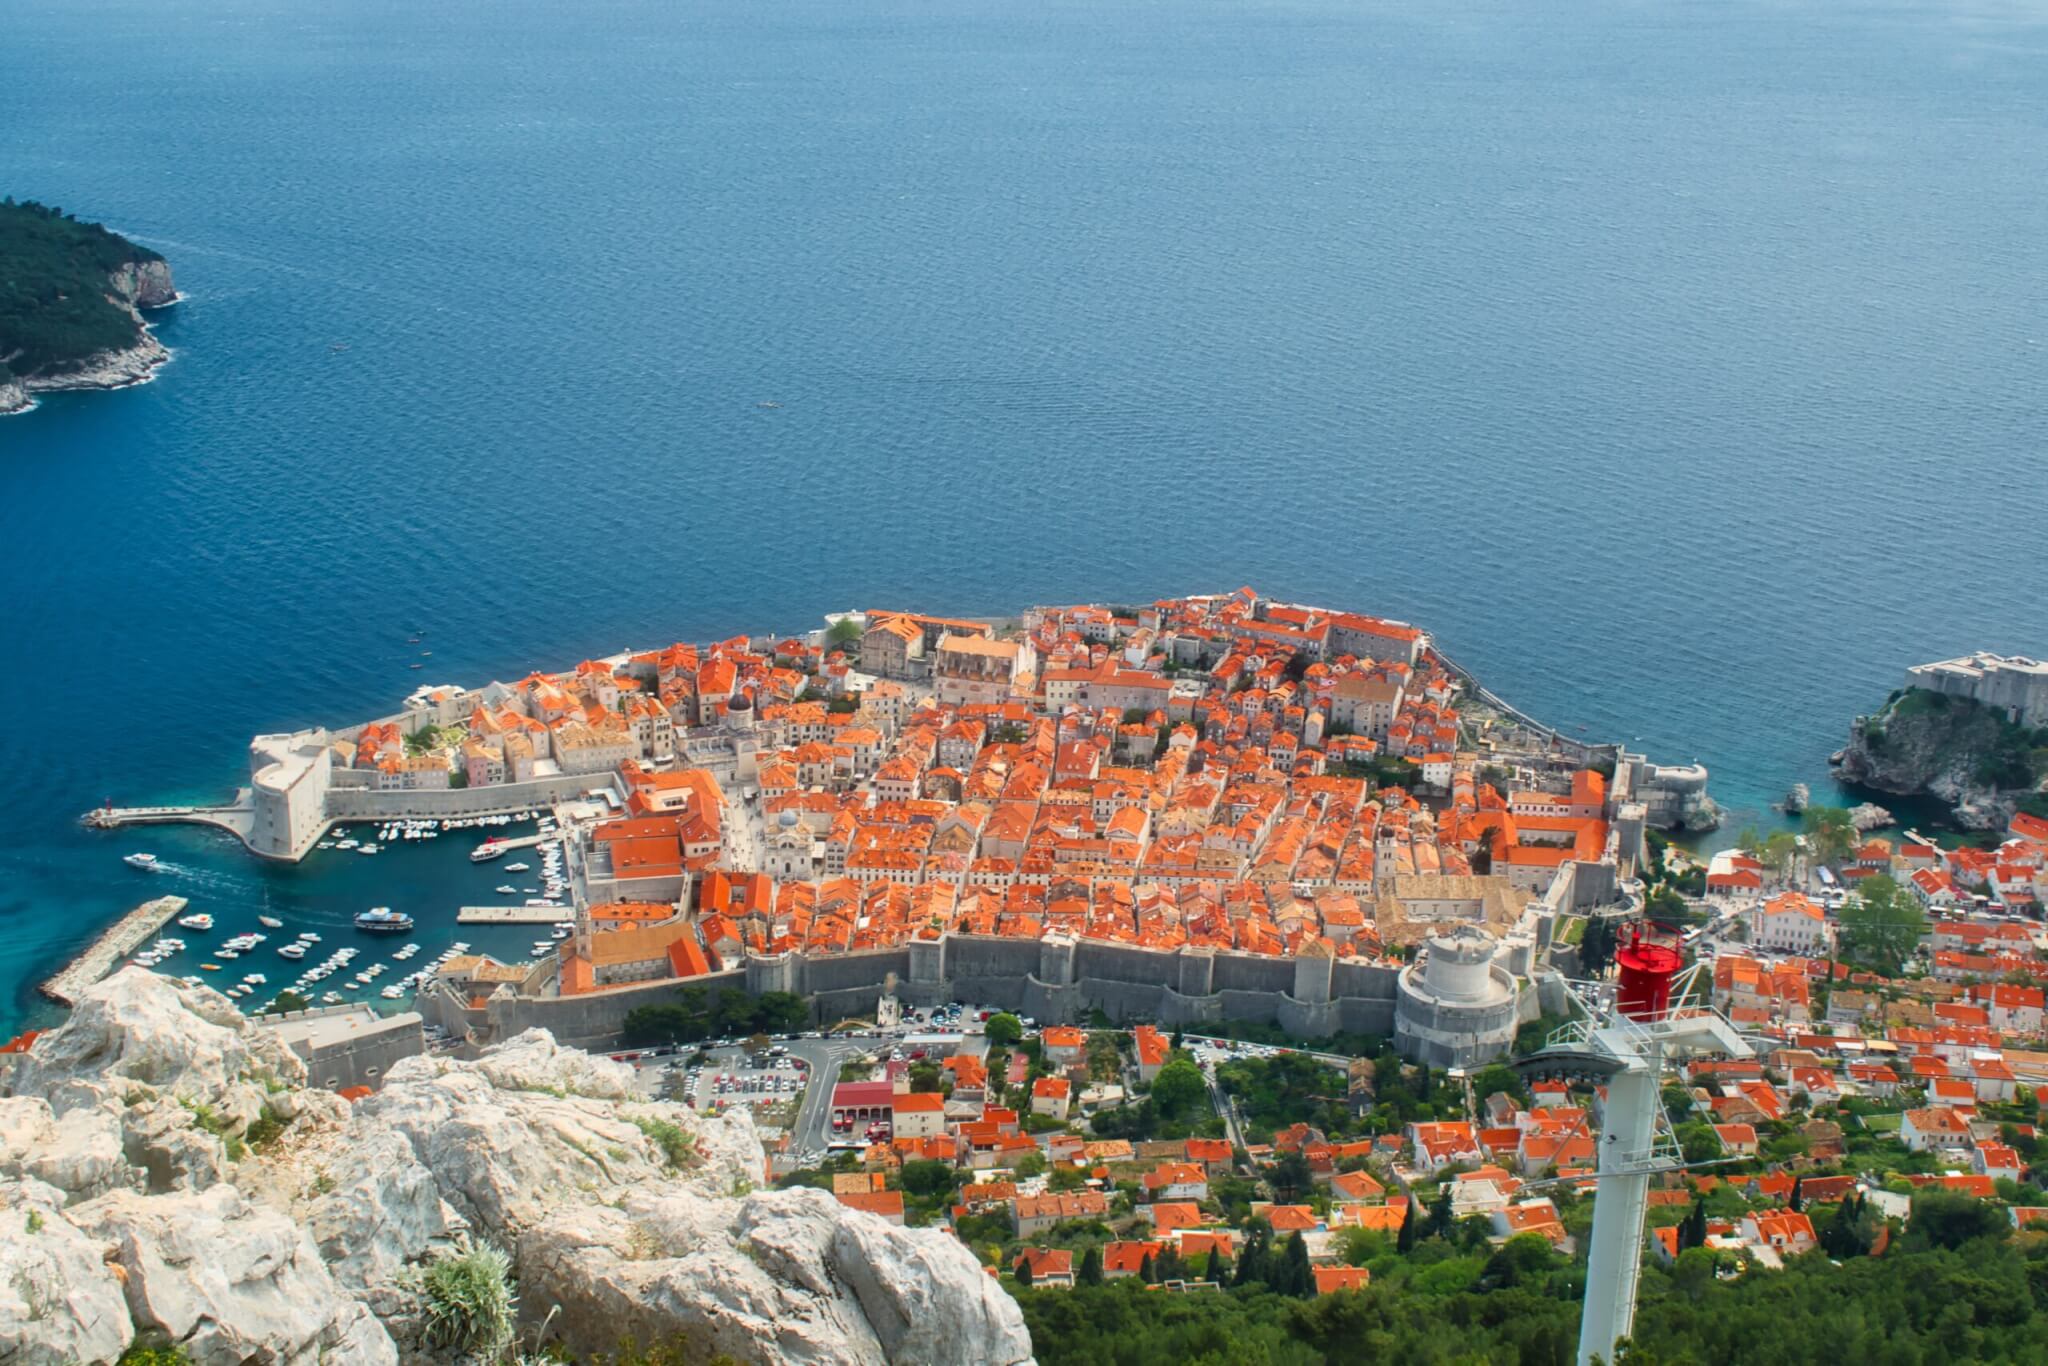 Aerial view of the old city of dubrovnik croatia near blue sea